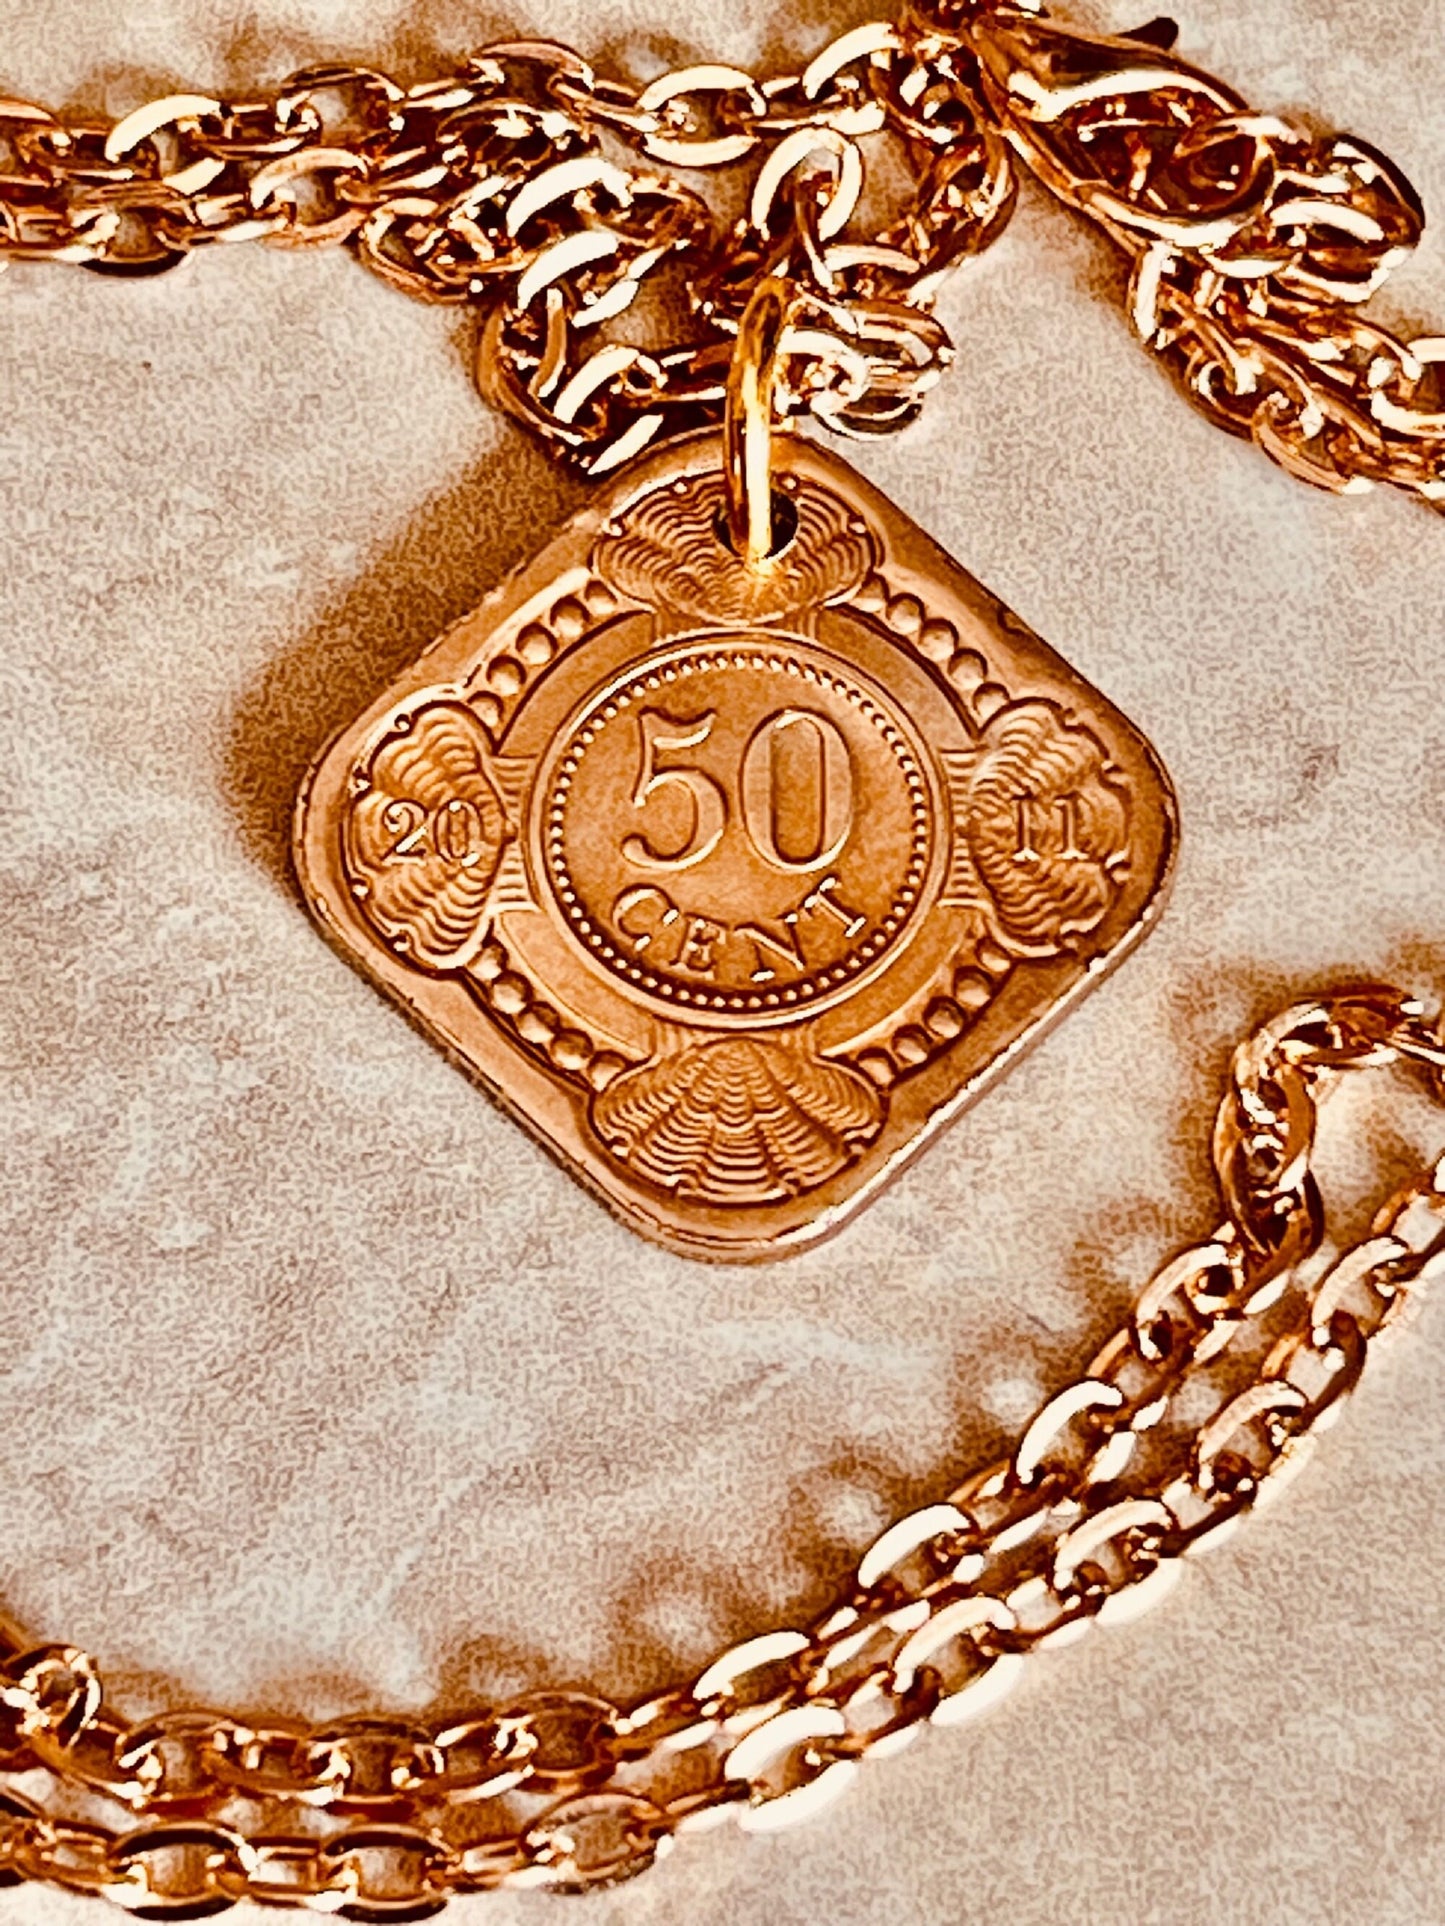 Netherland Coin Pendant Antilles 50 Cents Gulden Necklace Jewelry Gift For Friend Coin Charm Gift For Him, Her, World Coins Collector